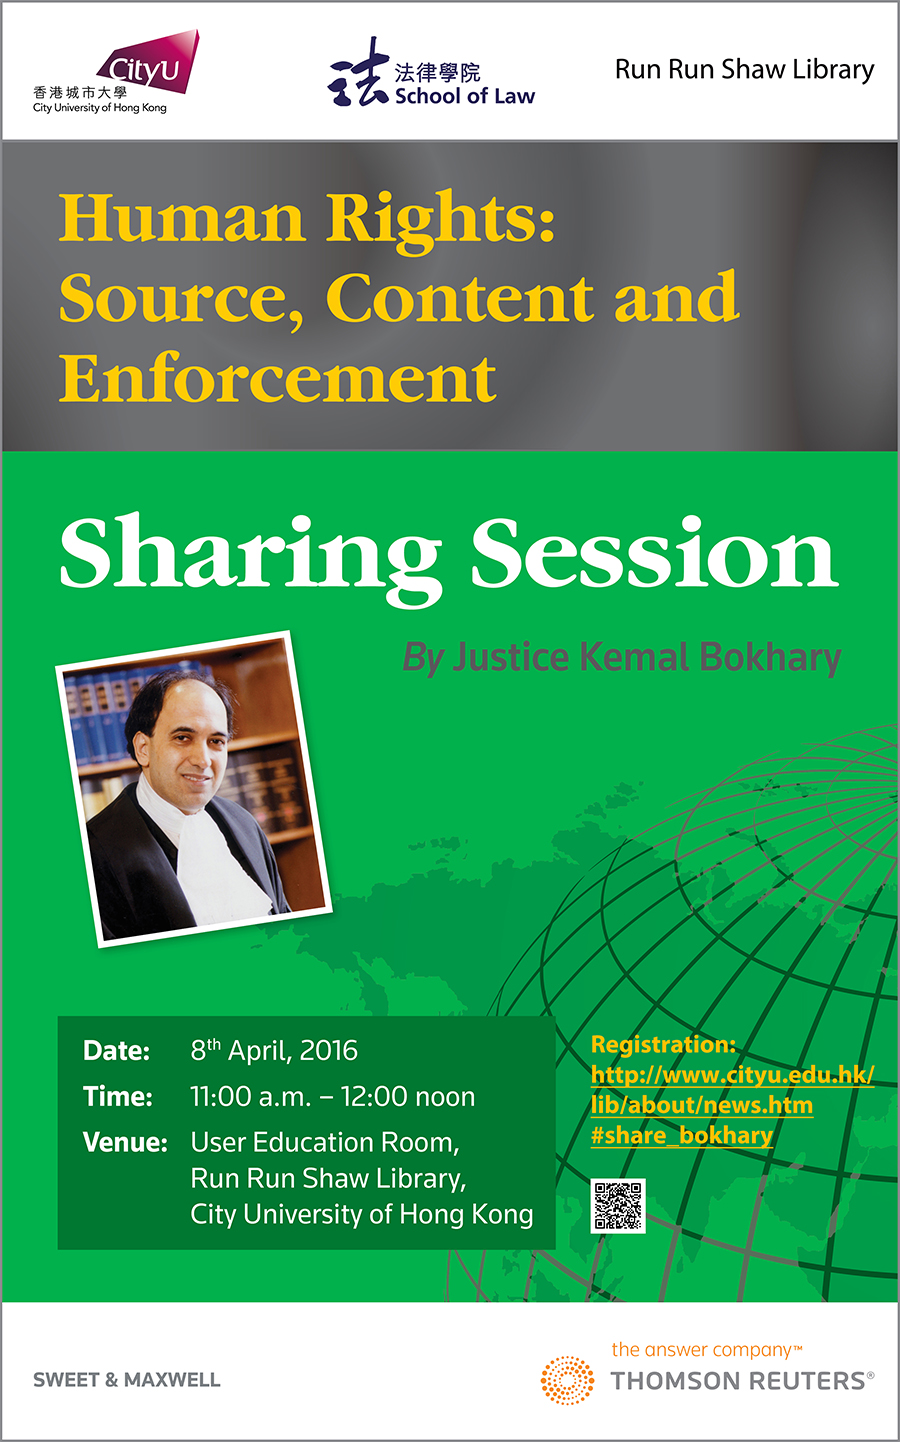 Human Rights: Source, Contents and Enforcement: Sharing Session by Mr. Justice Kemal Bokhary 
        Venue: User Education Room, Run Run Shaw Library.
        Date: 8 April 2016 (Friday).
        Time: 11:00 am - 12:00 noon.
        Language: English.
        Enquiry: 3442-8395 (Law Section).
        Email: lblaw@cityu.edu.hk